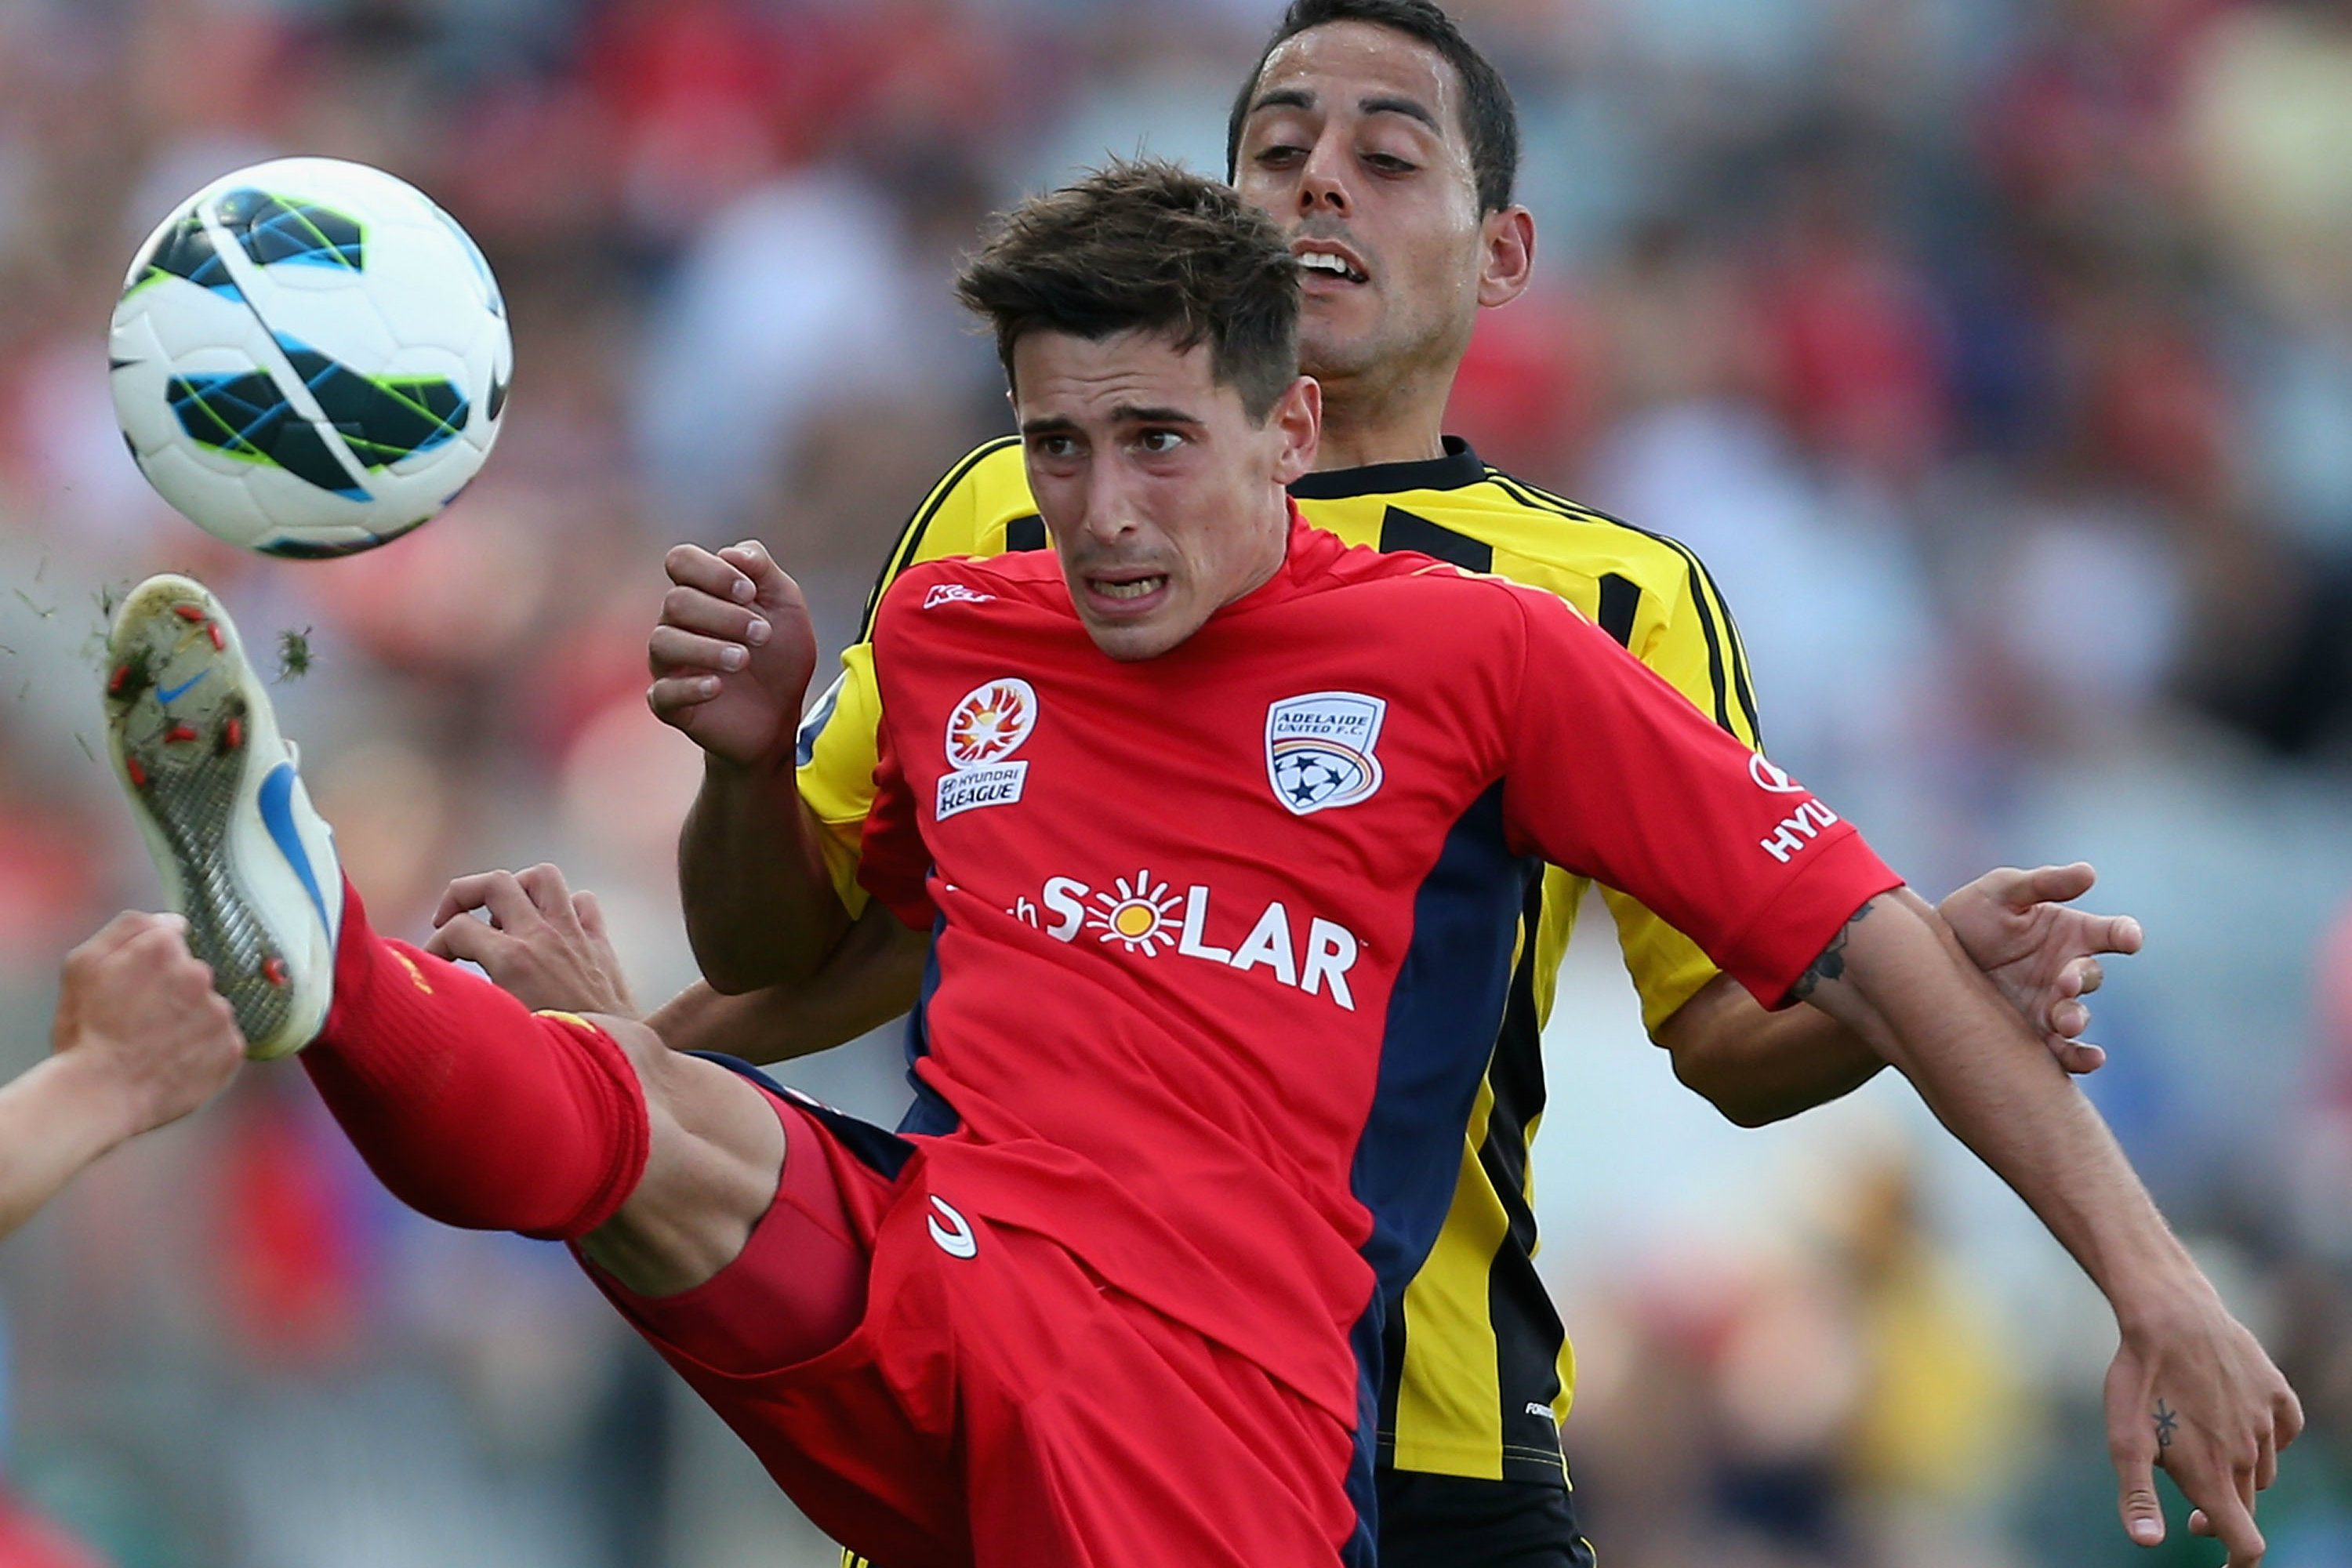 Evan Kostopoulos in action for Adelaide United